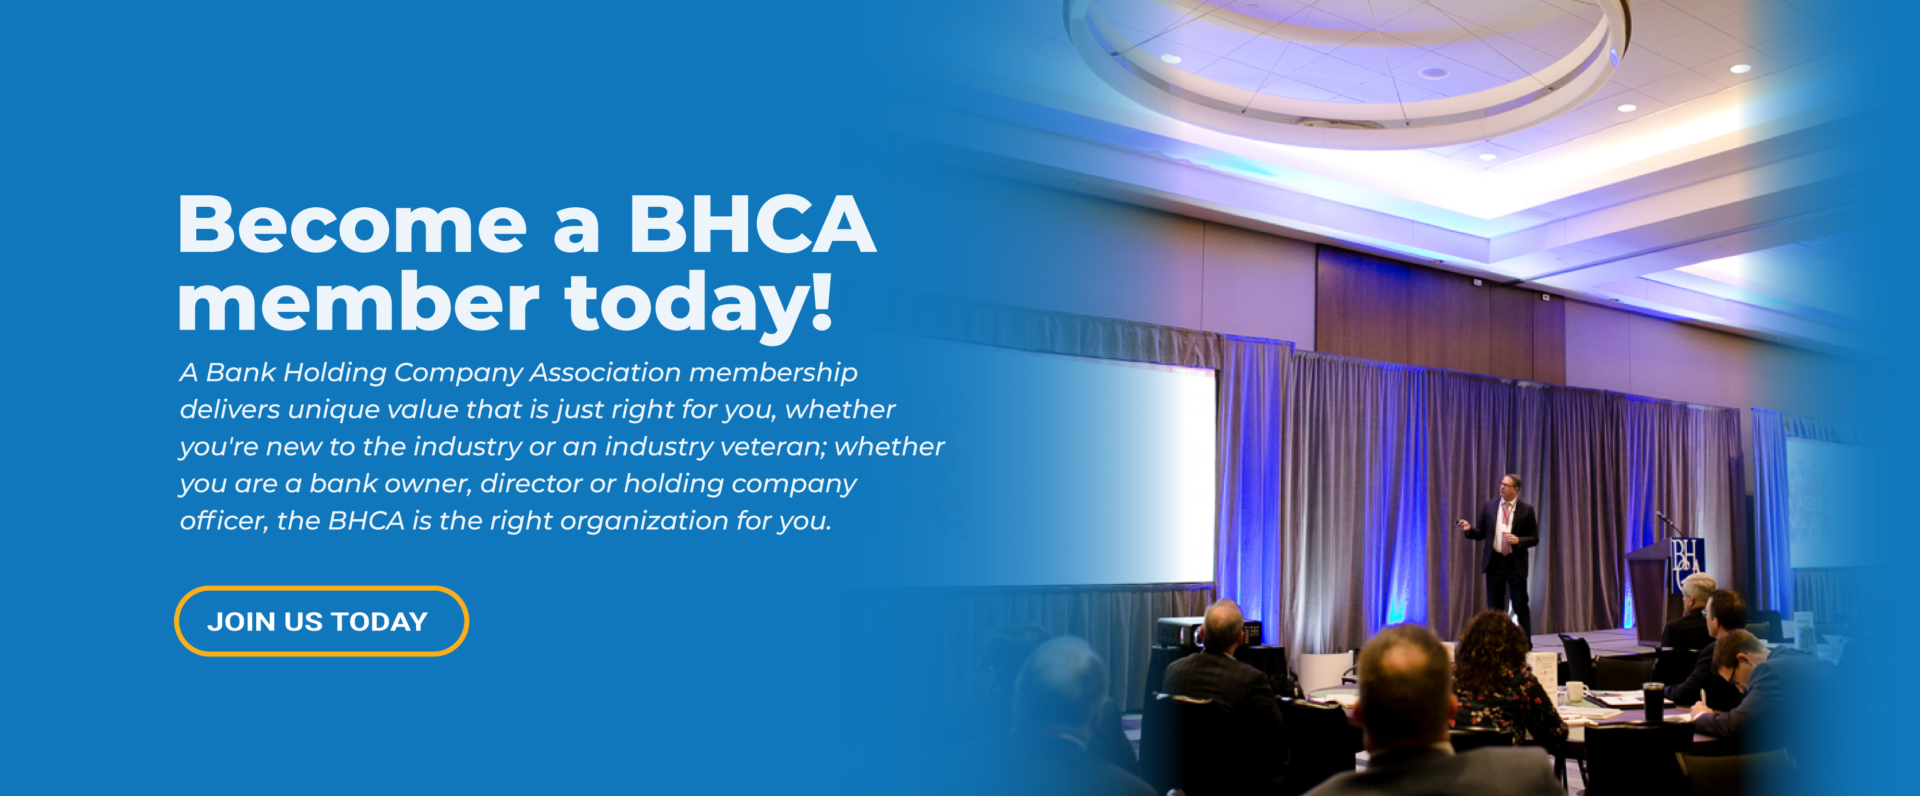 Become a BHCA Member Today!